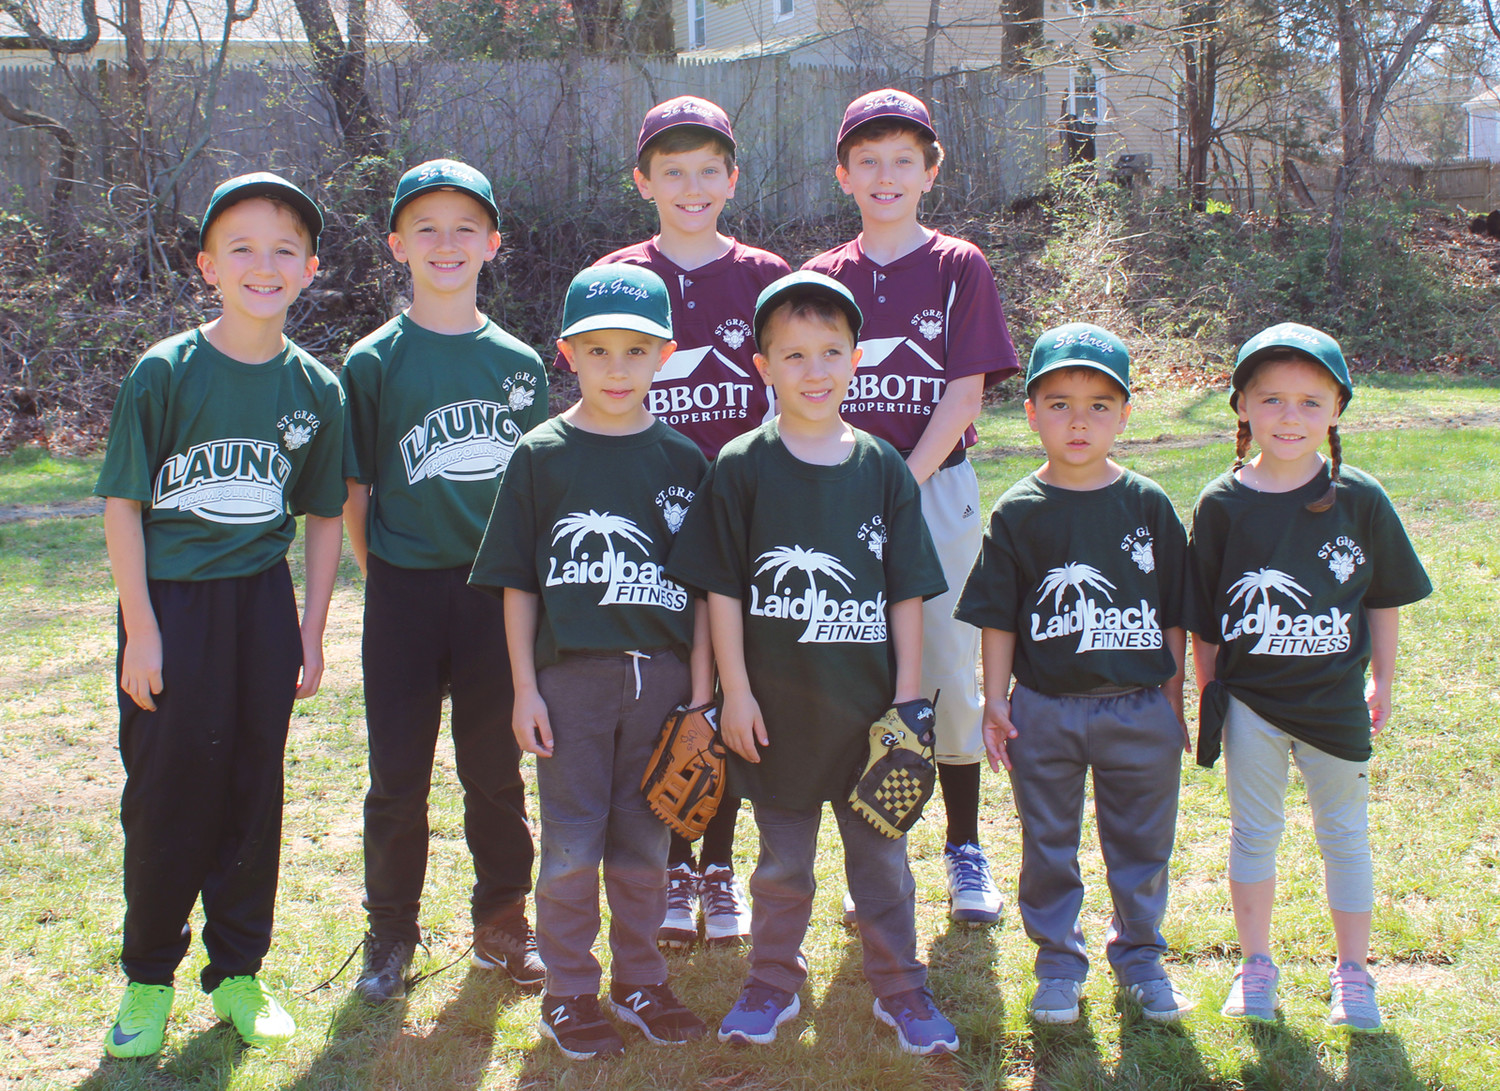 The St. Gregory the Great Baseball League kicked off its season. In the group photo on top from back left: Oliver and Bennett Jackson, Josh and John Maynard. Front left to right: Christohper and Charlie DeRaffaele and Ben and Mia Goodine. Missing are Thomas and Edmund Sardelli.